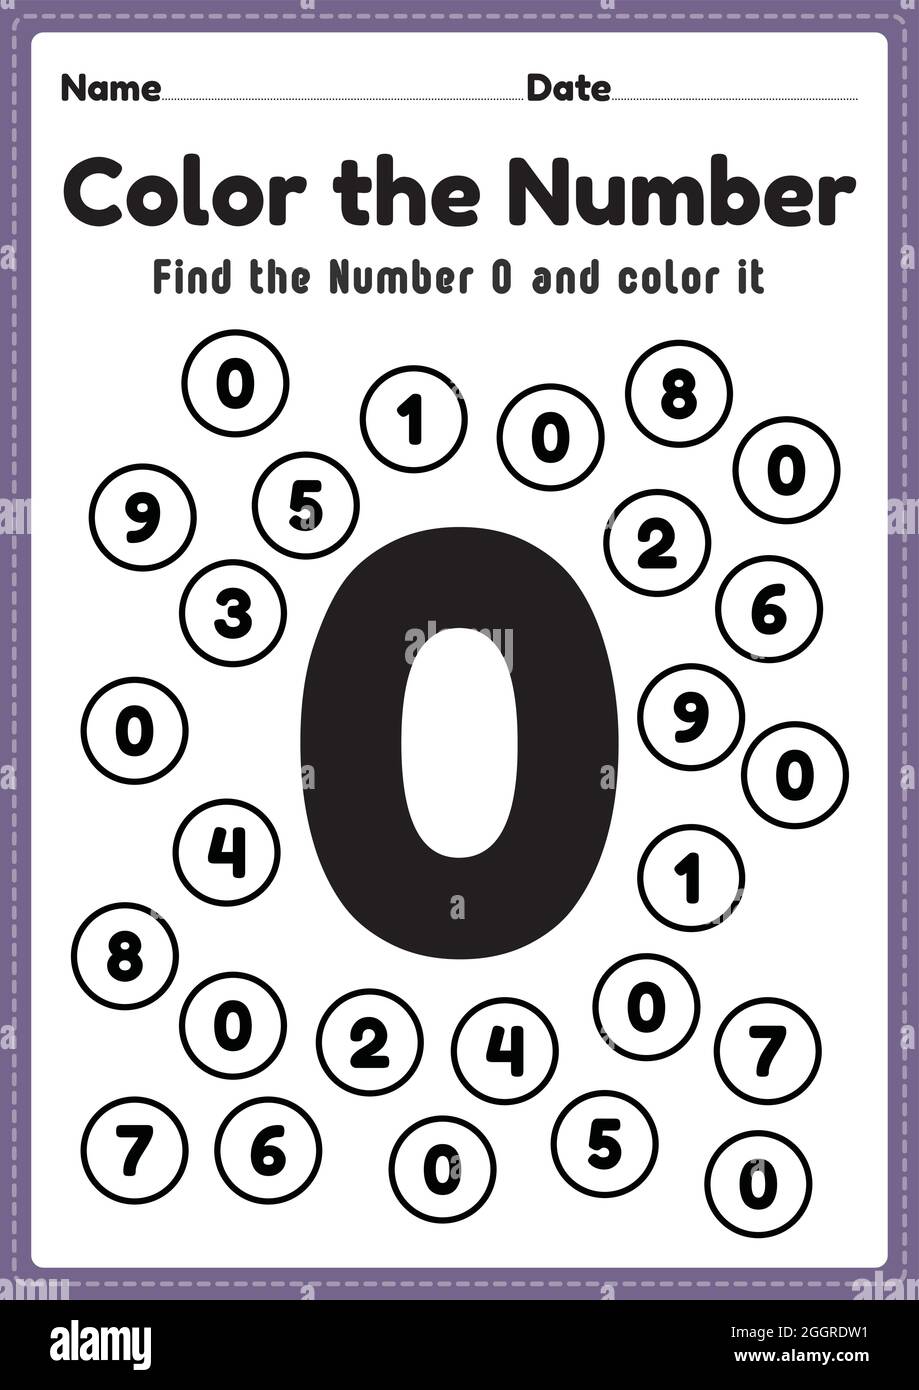 Math coloring counting number worksheet maths activities for kindergarten kids to learn basic mathematics skills in a printable page stock vector image art